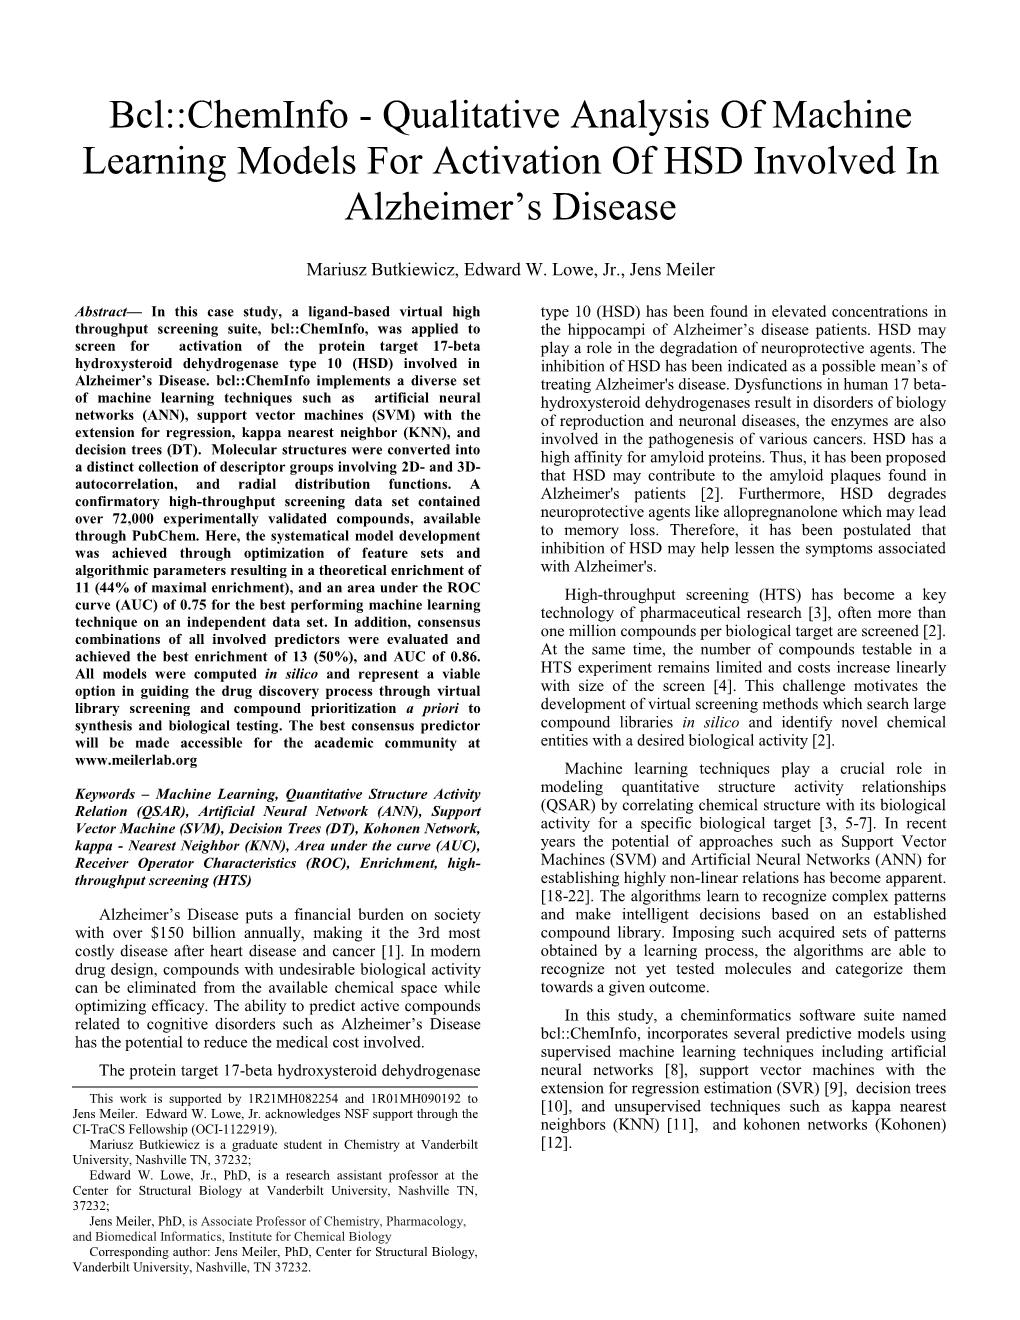 Cheminfo - Qualitative Analysis of Machine Learning Models for Activation of HSD Involved in Alzheimer’S Disease